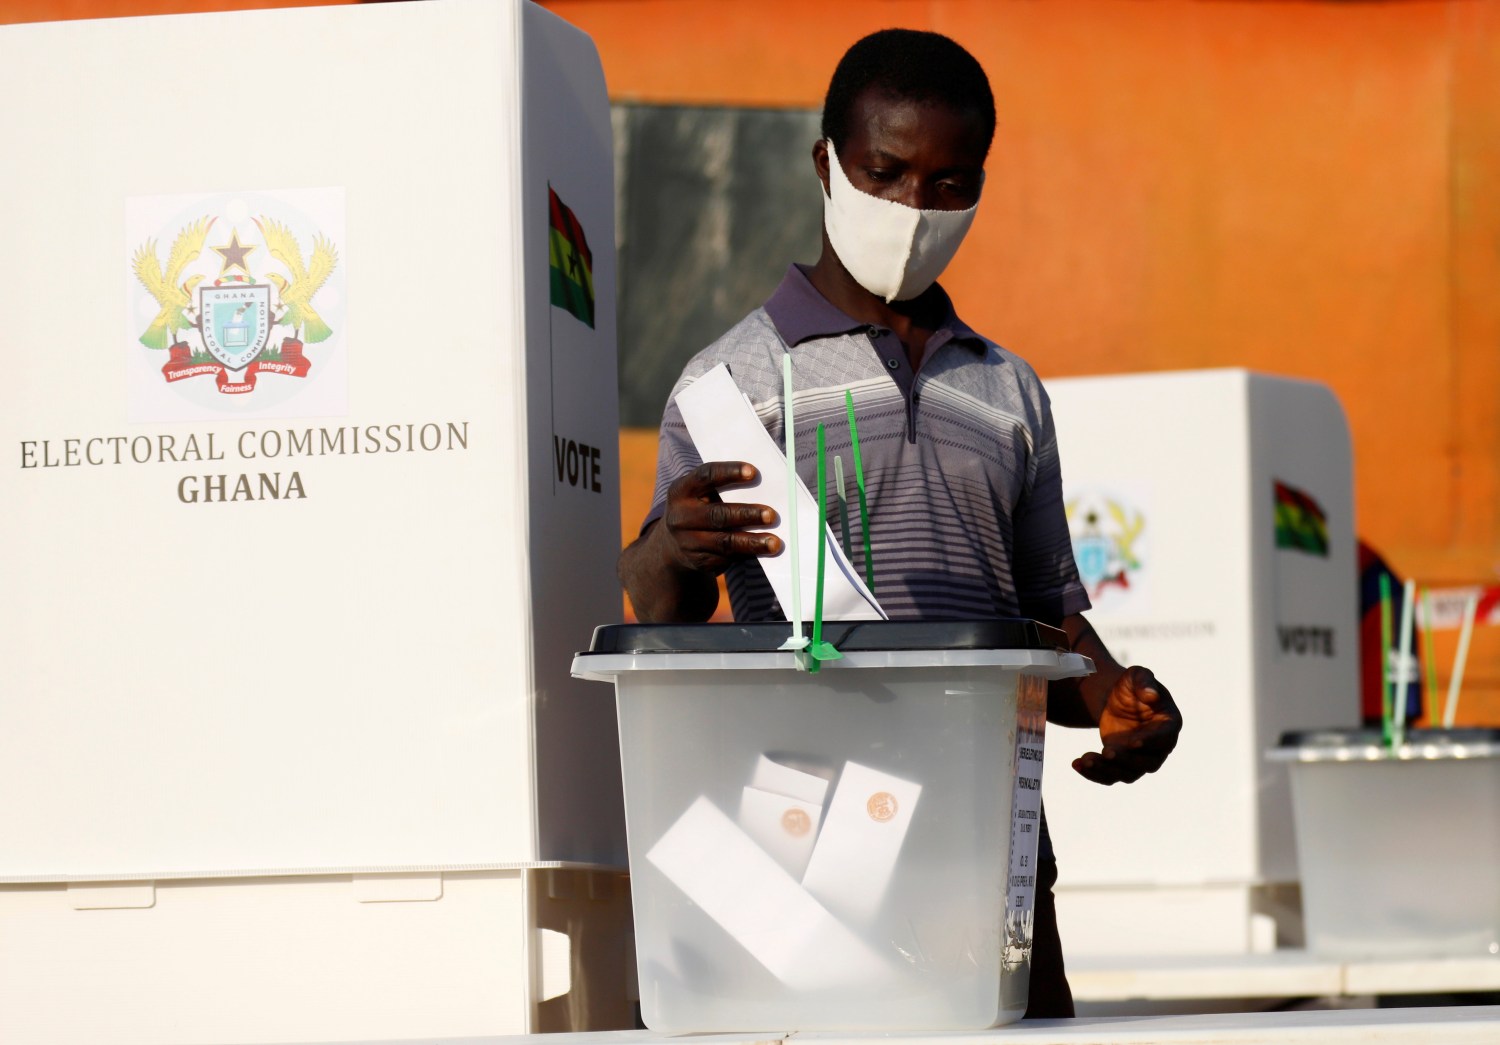 A man casts his vote at a polling station during Ghana's presidential and parliamentary elections in Kyebi, Ghana December 7, 2020. REUTERS/Francis Kokoroko